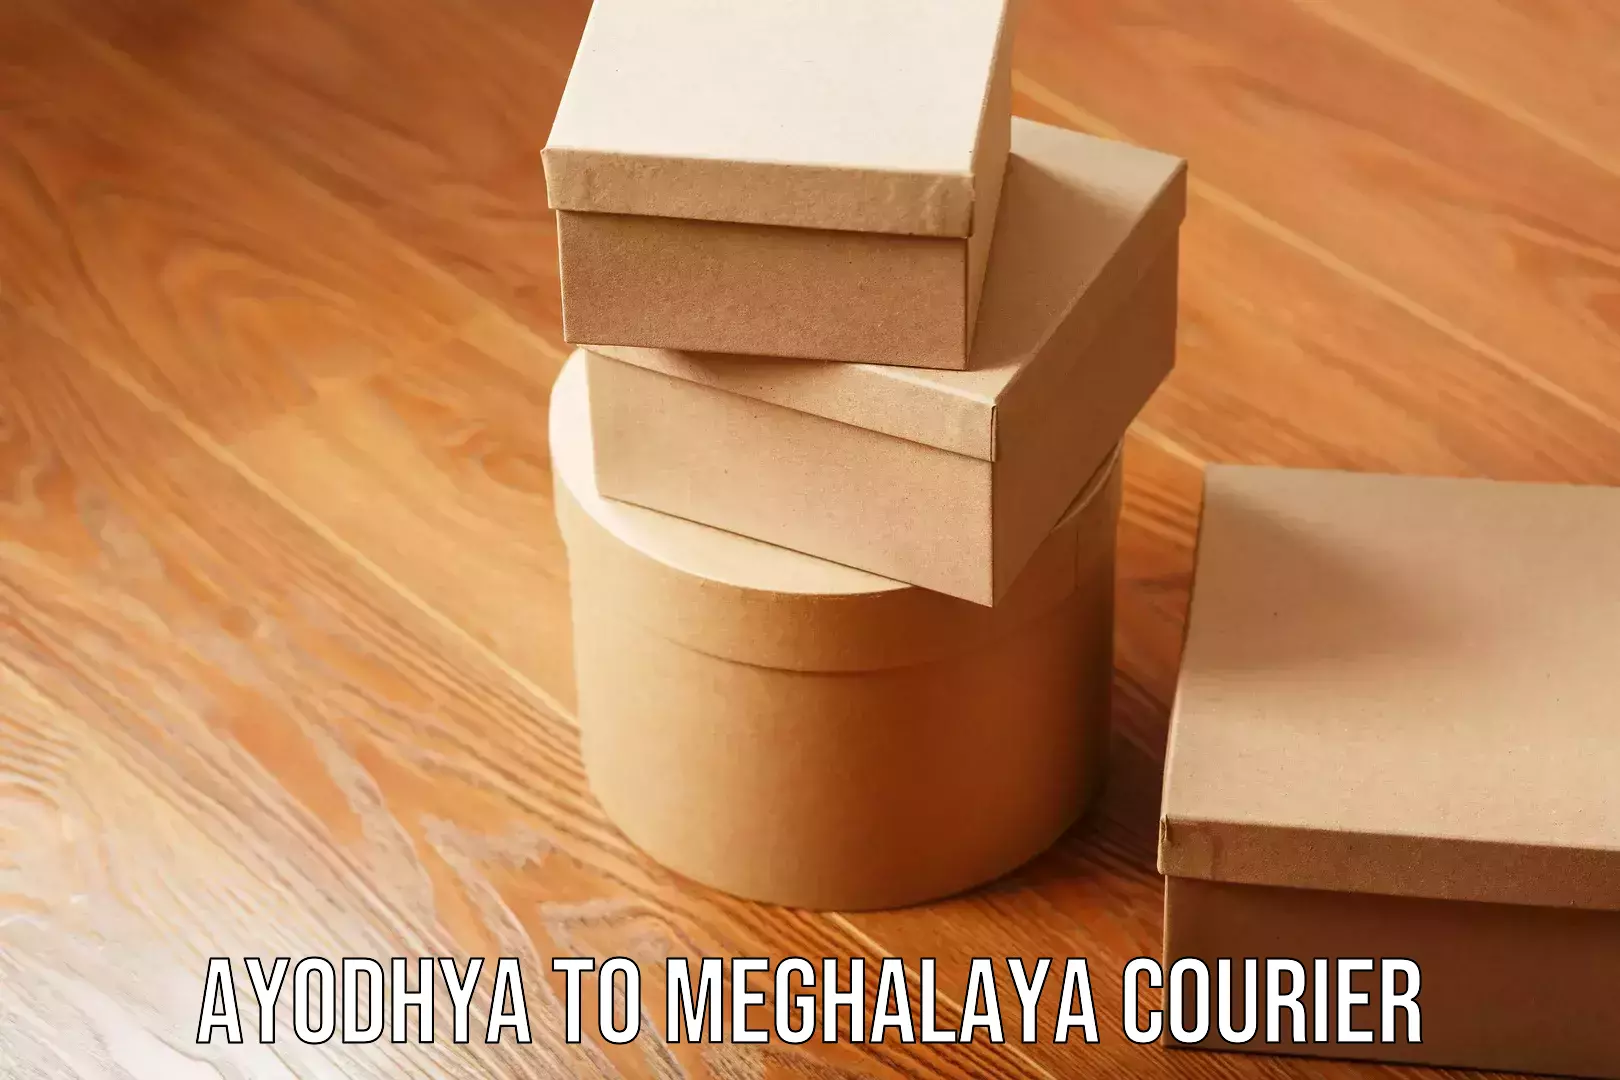 Customer-oriented courier services Ayodhya to Meghalaya